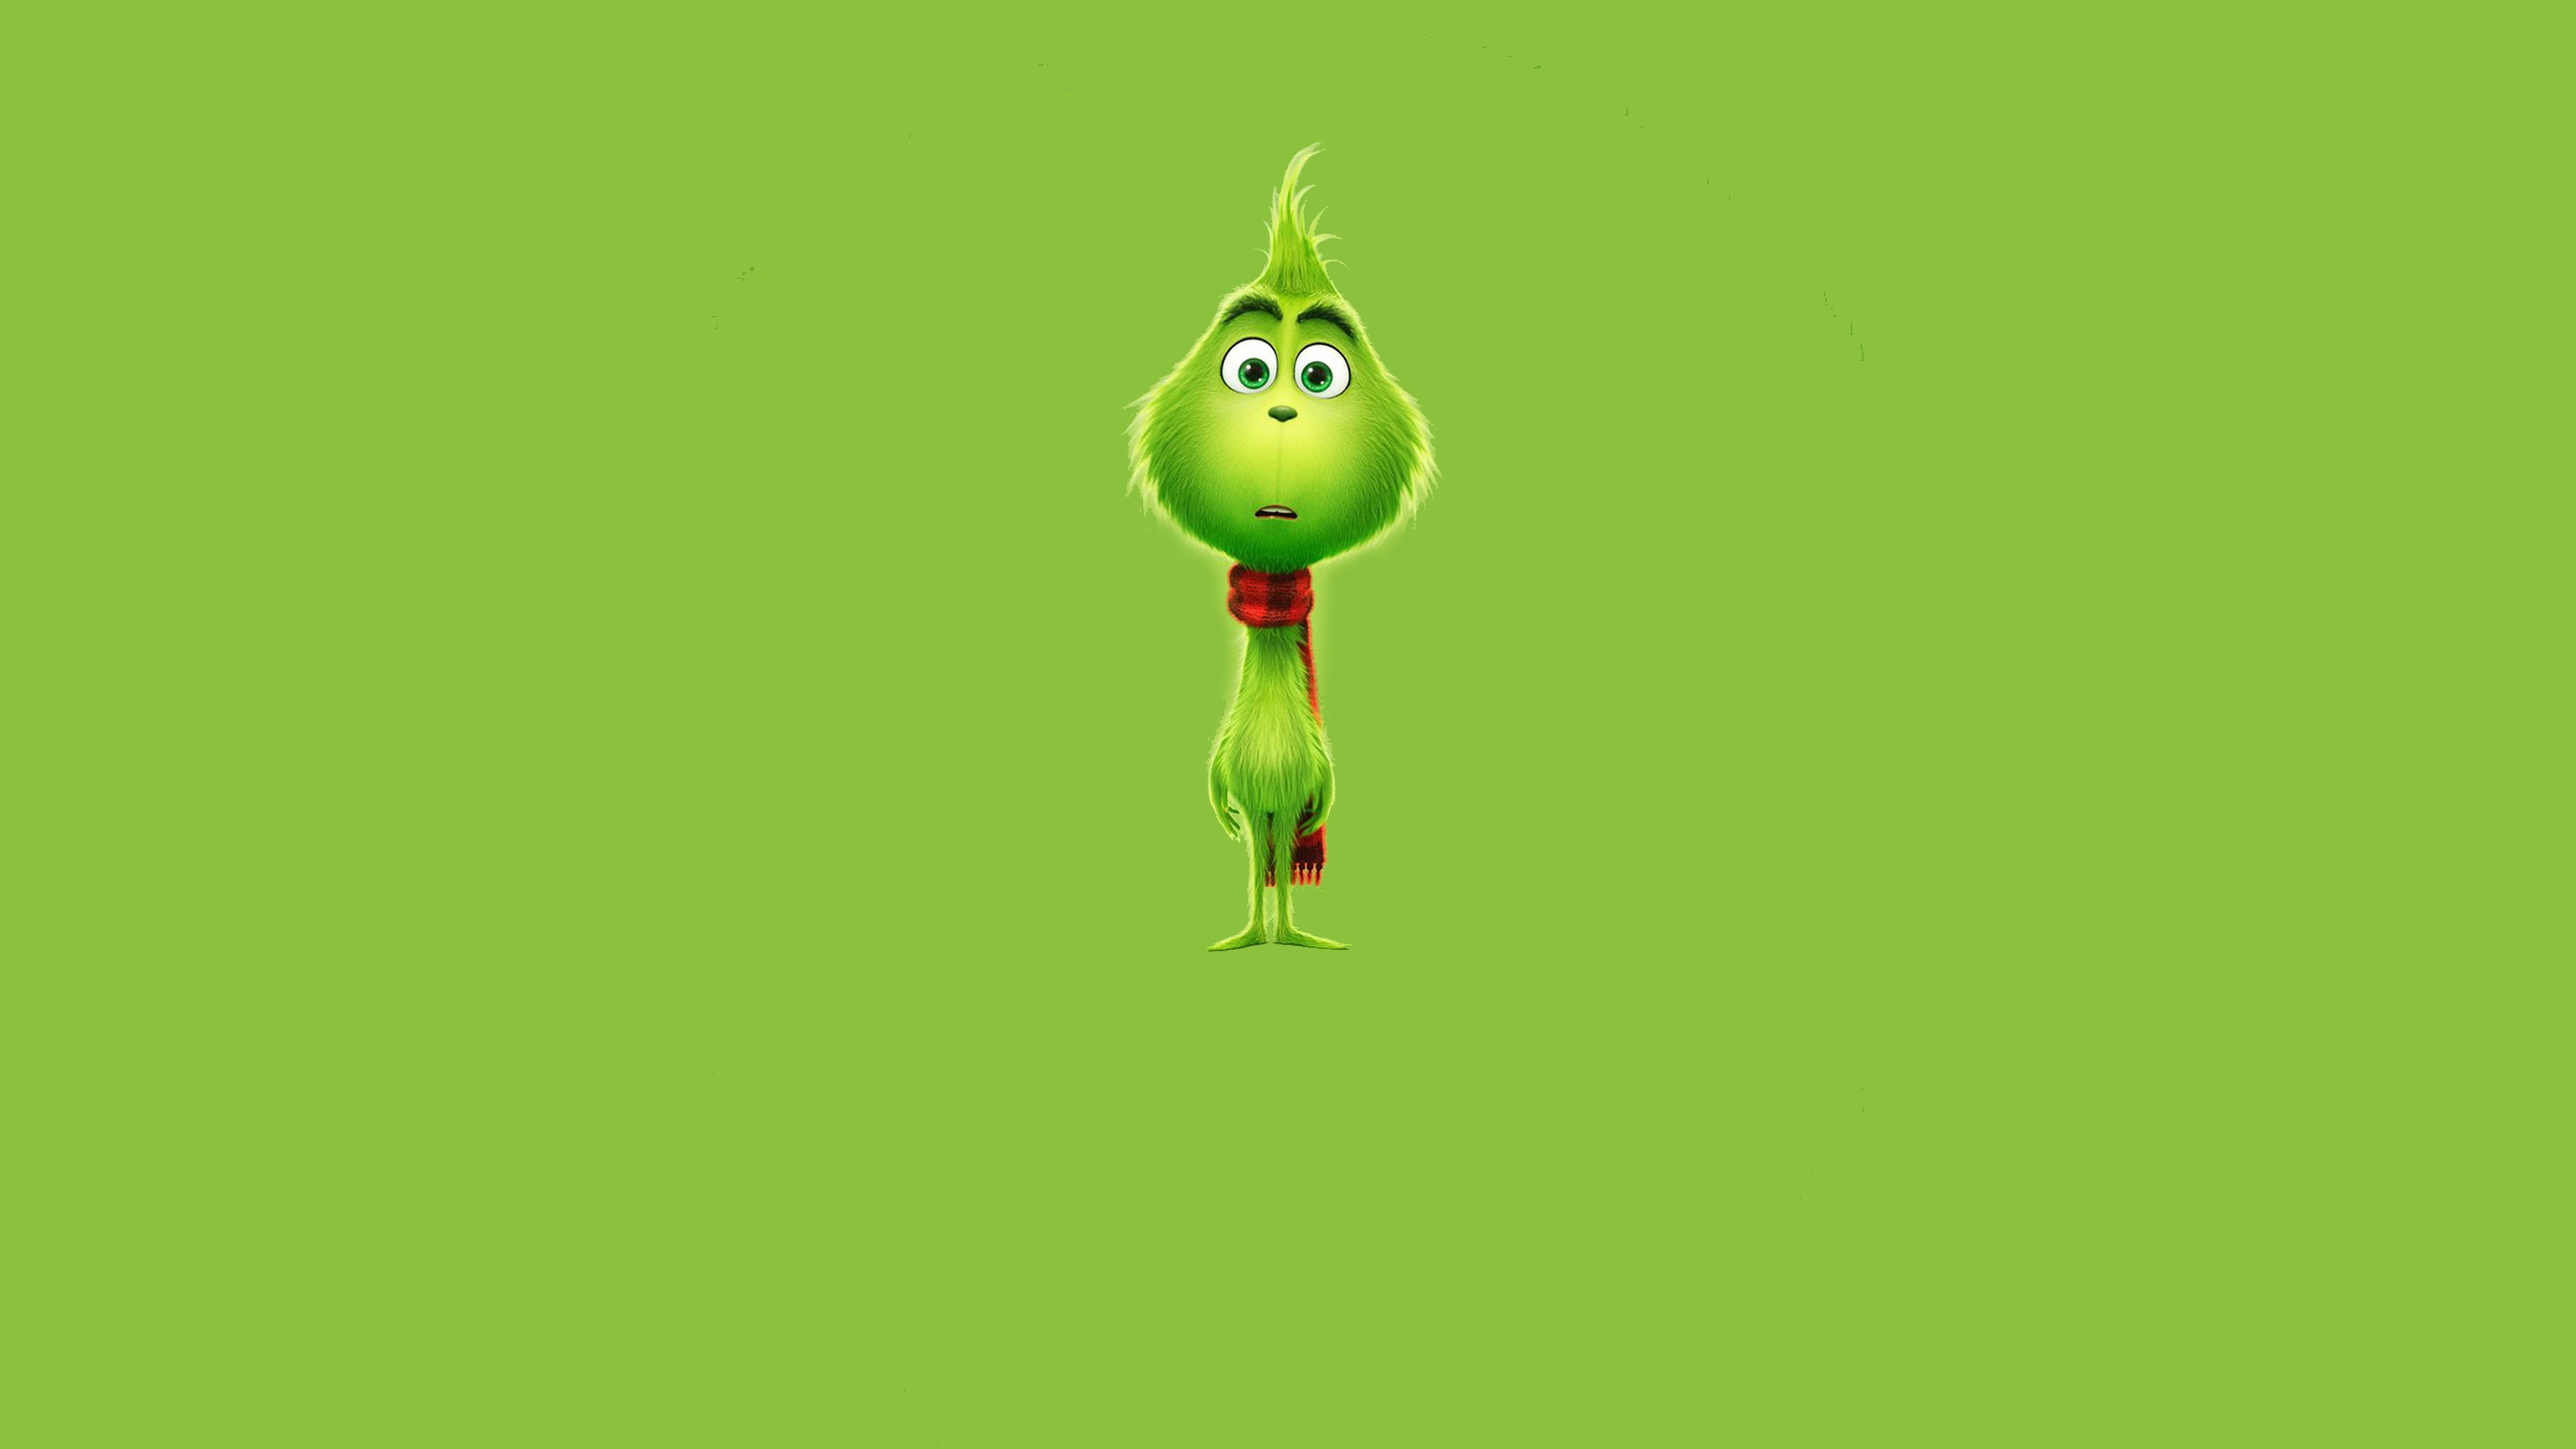 Wallpaper How the Grinch Stole Christmas, 4k, Movies #17026